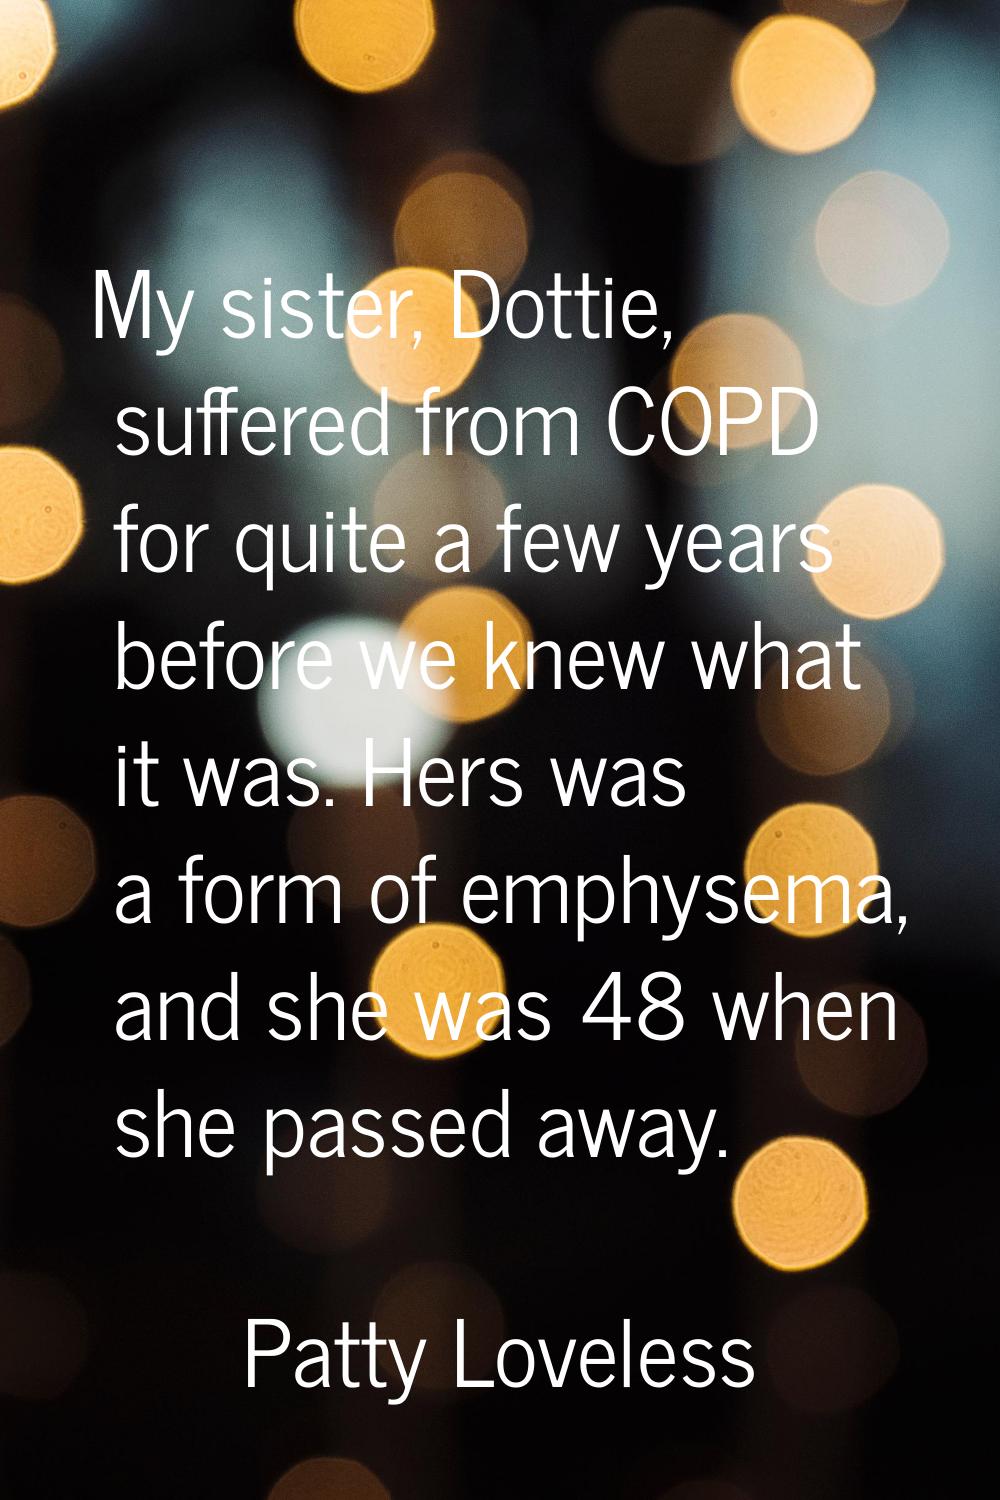 My sister, Dottie, suffered from COPD for quite a few years before we knew what it was. Hers was a 